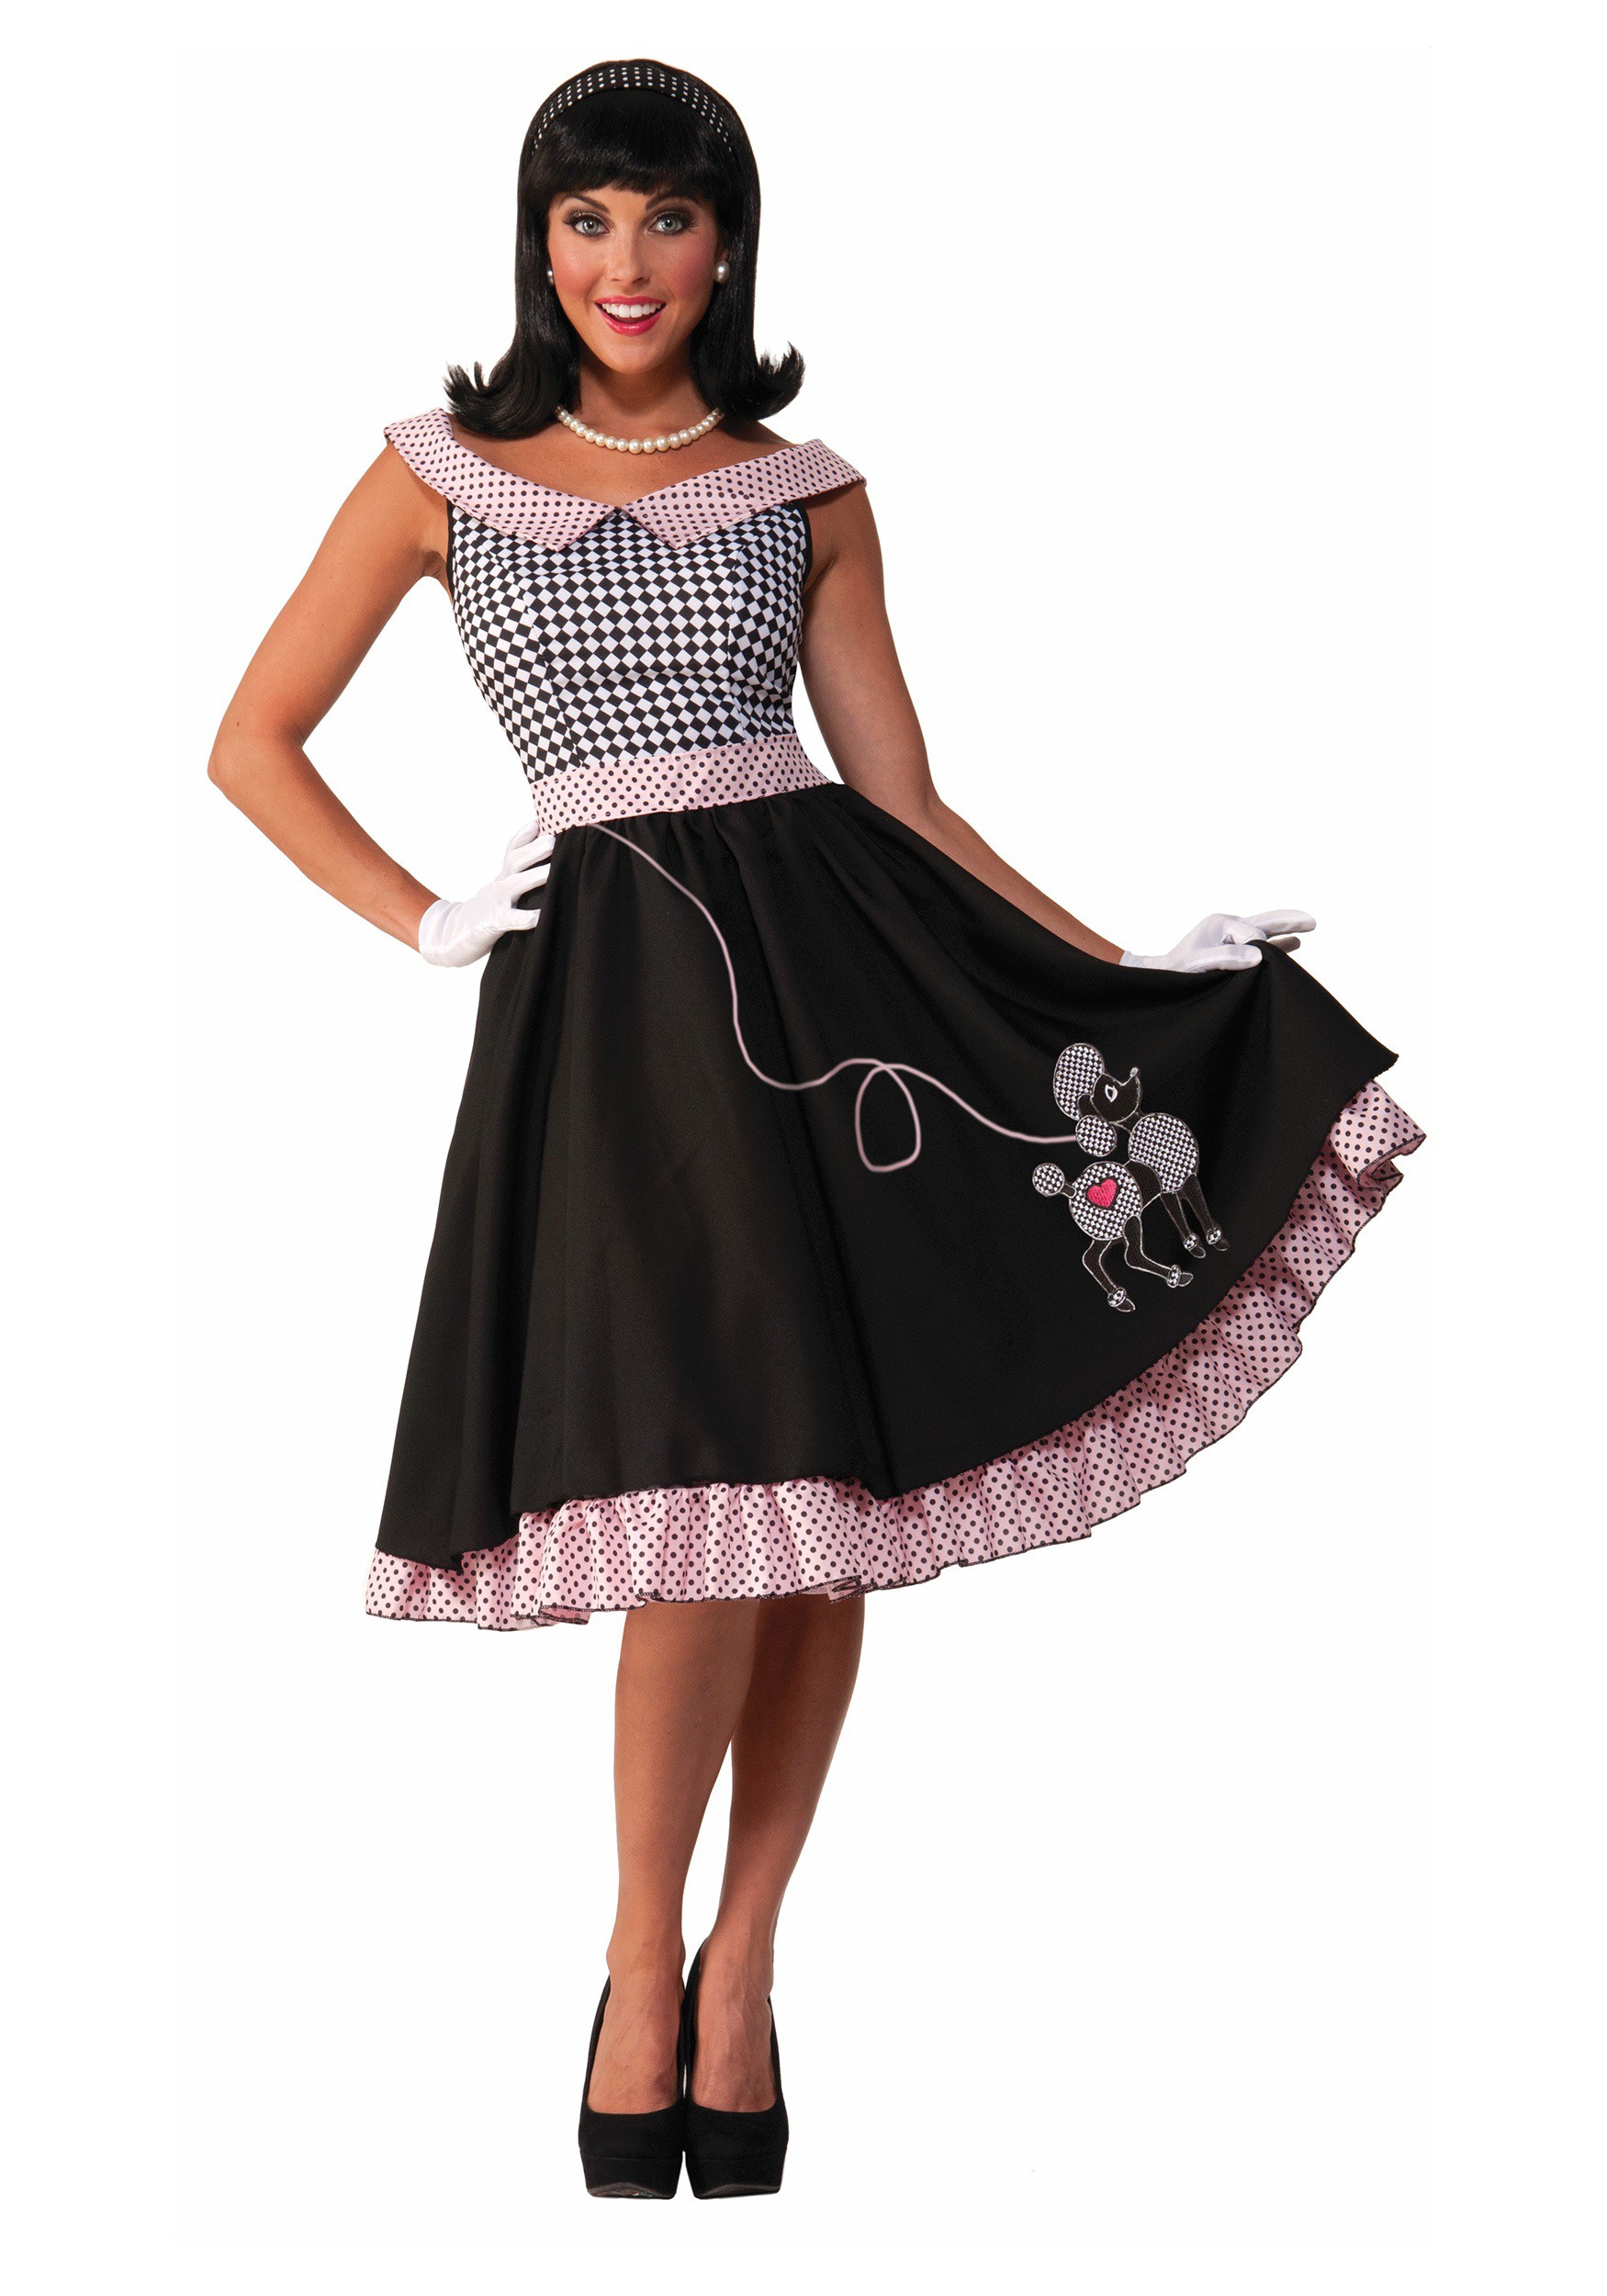 50s costumes for women images 2017